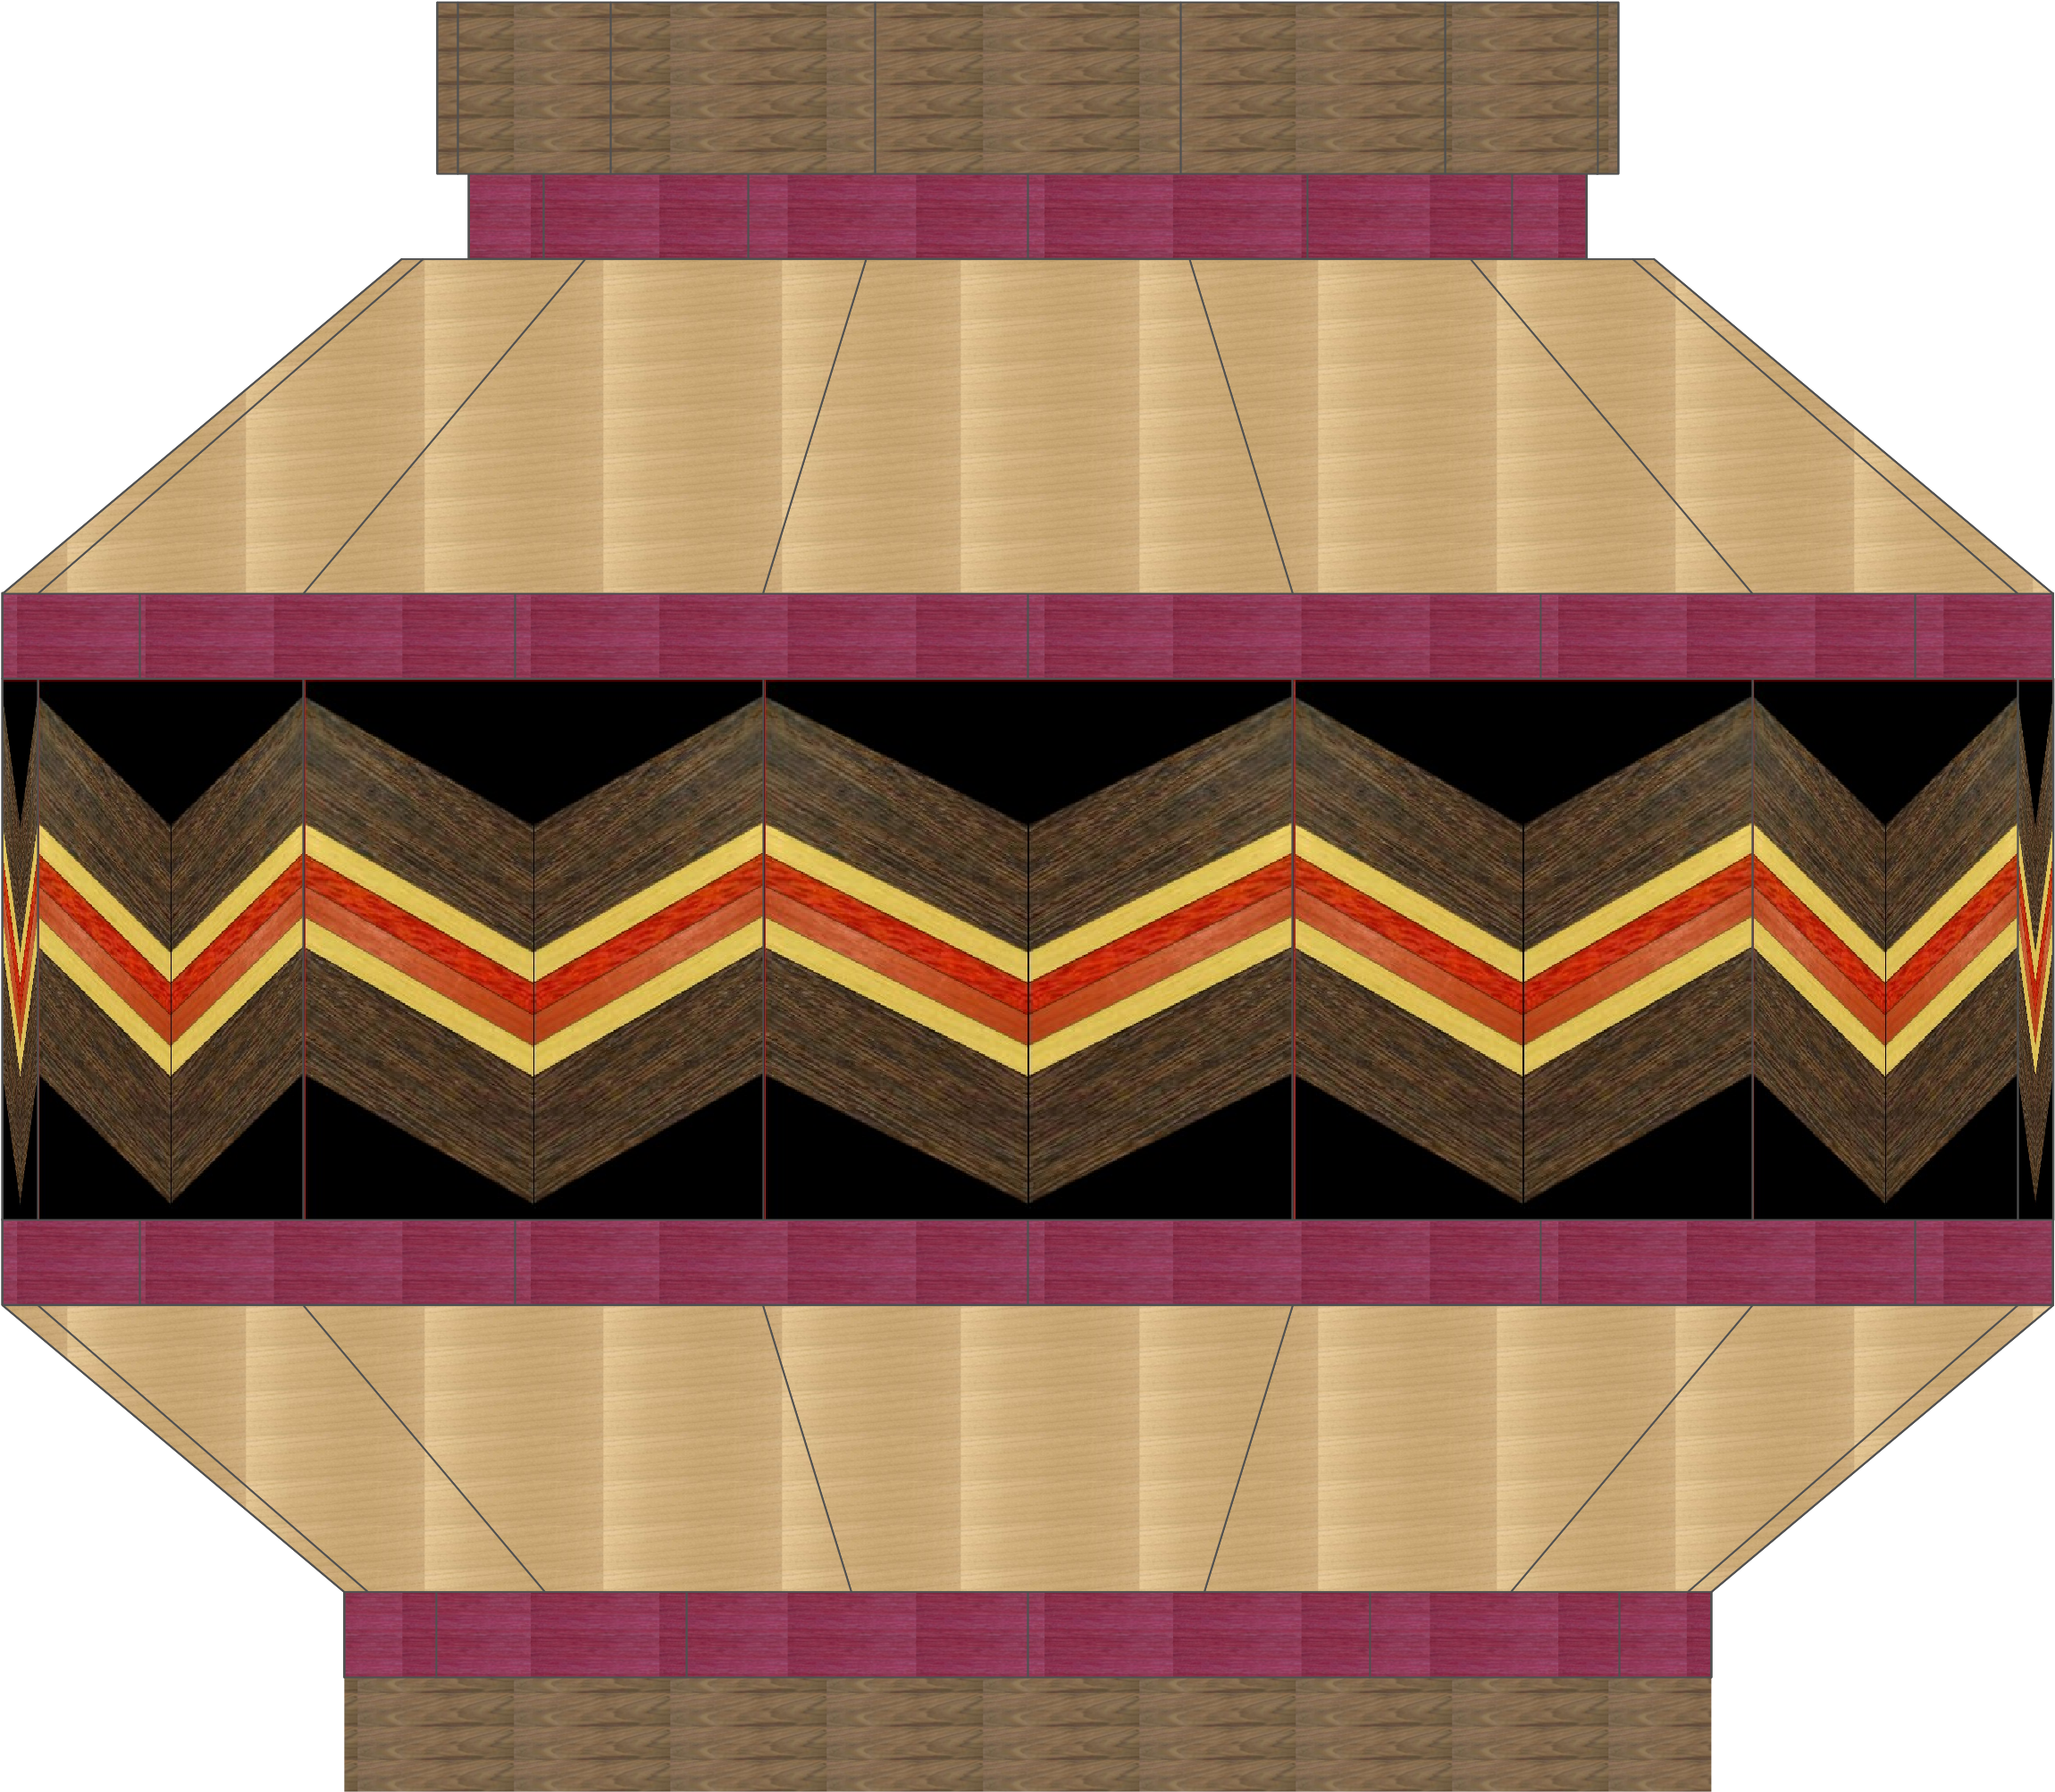 Diagram of the Chevron Vase after assembling each of the rings defined in the woodturning plans.